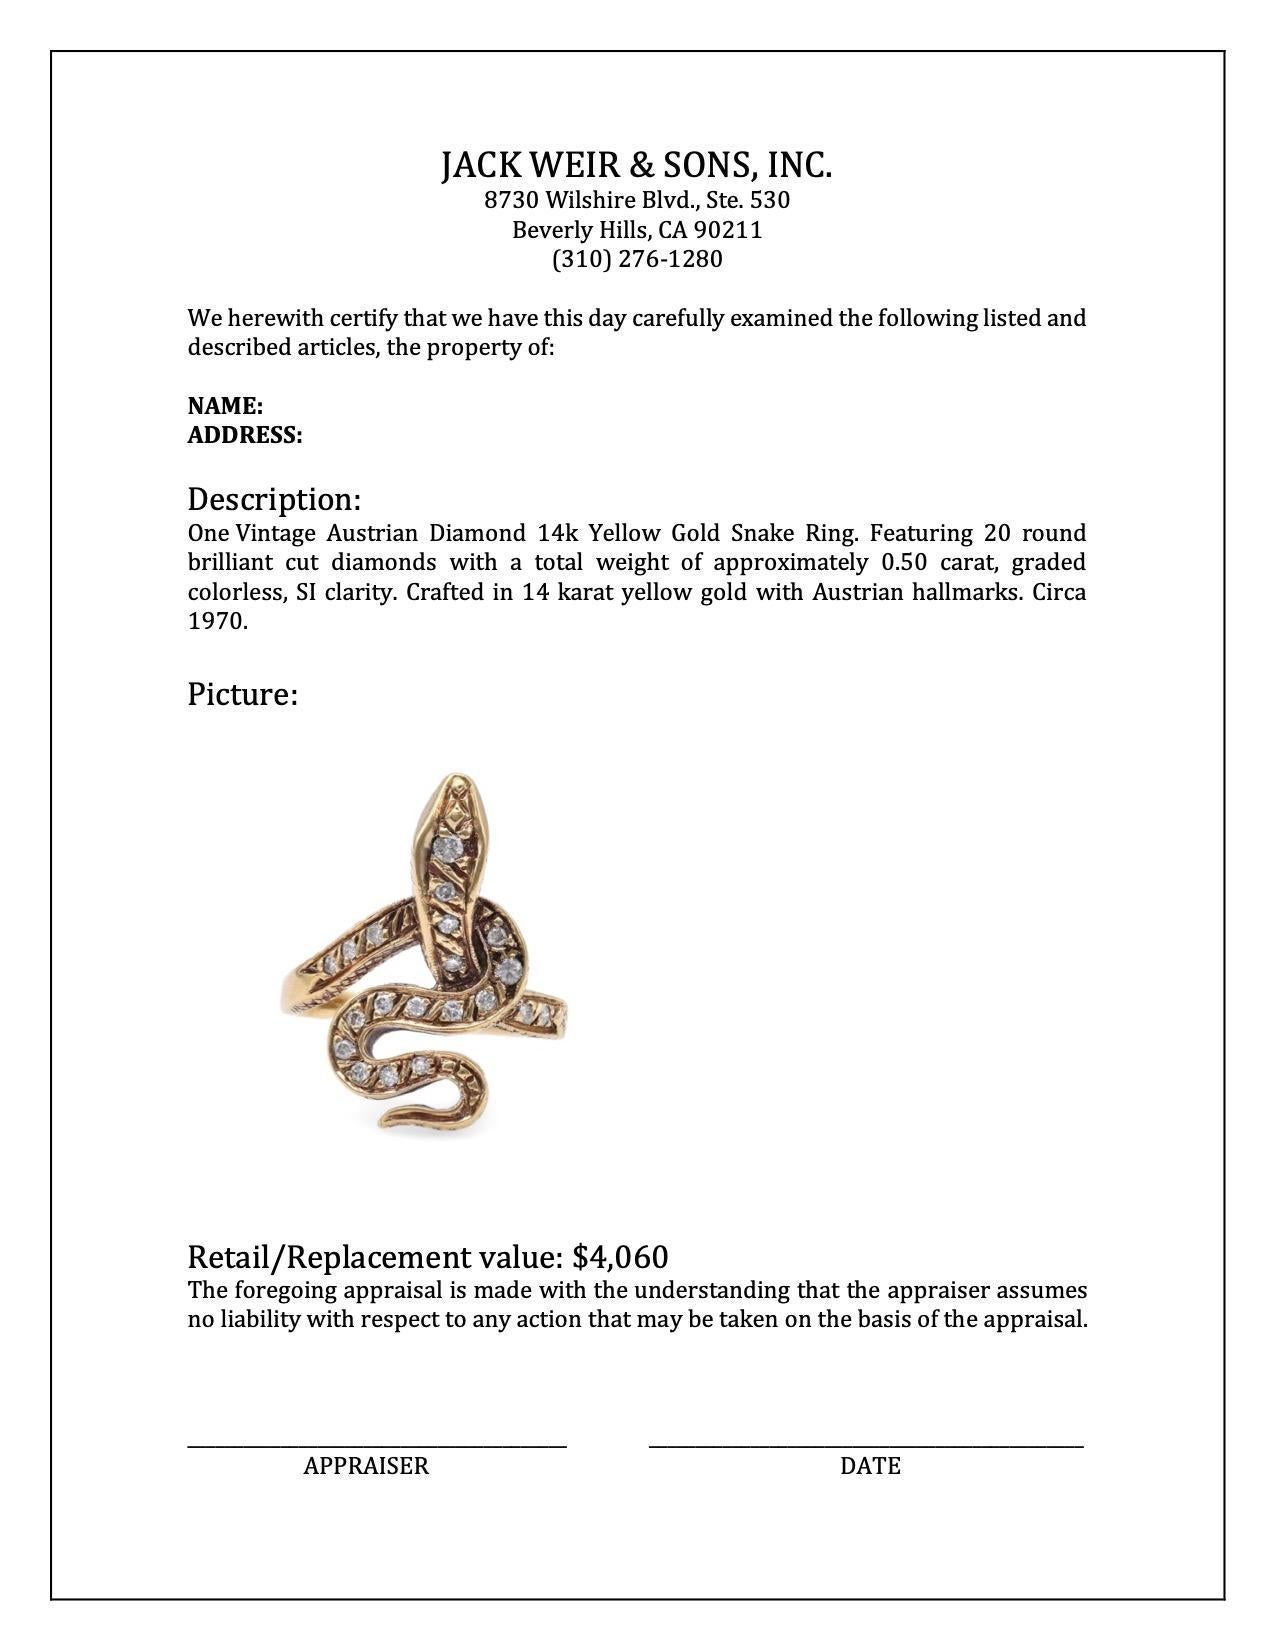 One Vintage Austrian Diamond 14k Yellow Gold Snake Ring In Excellent Condition For Sale In Beverly Hills, CA